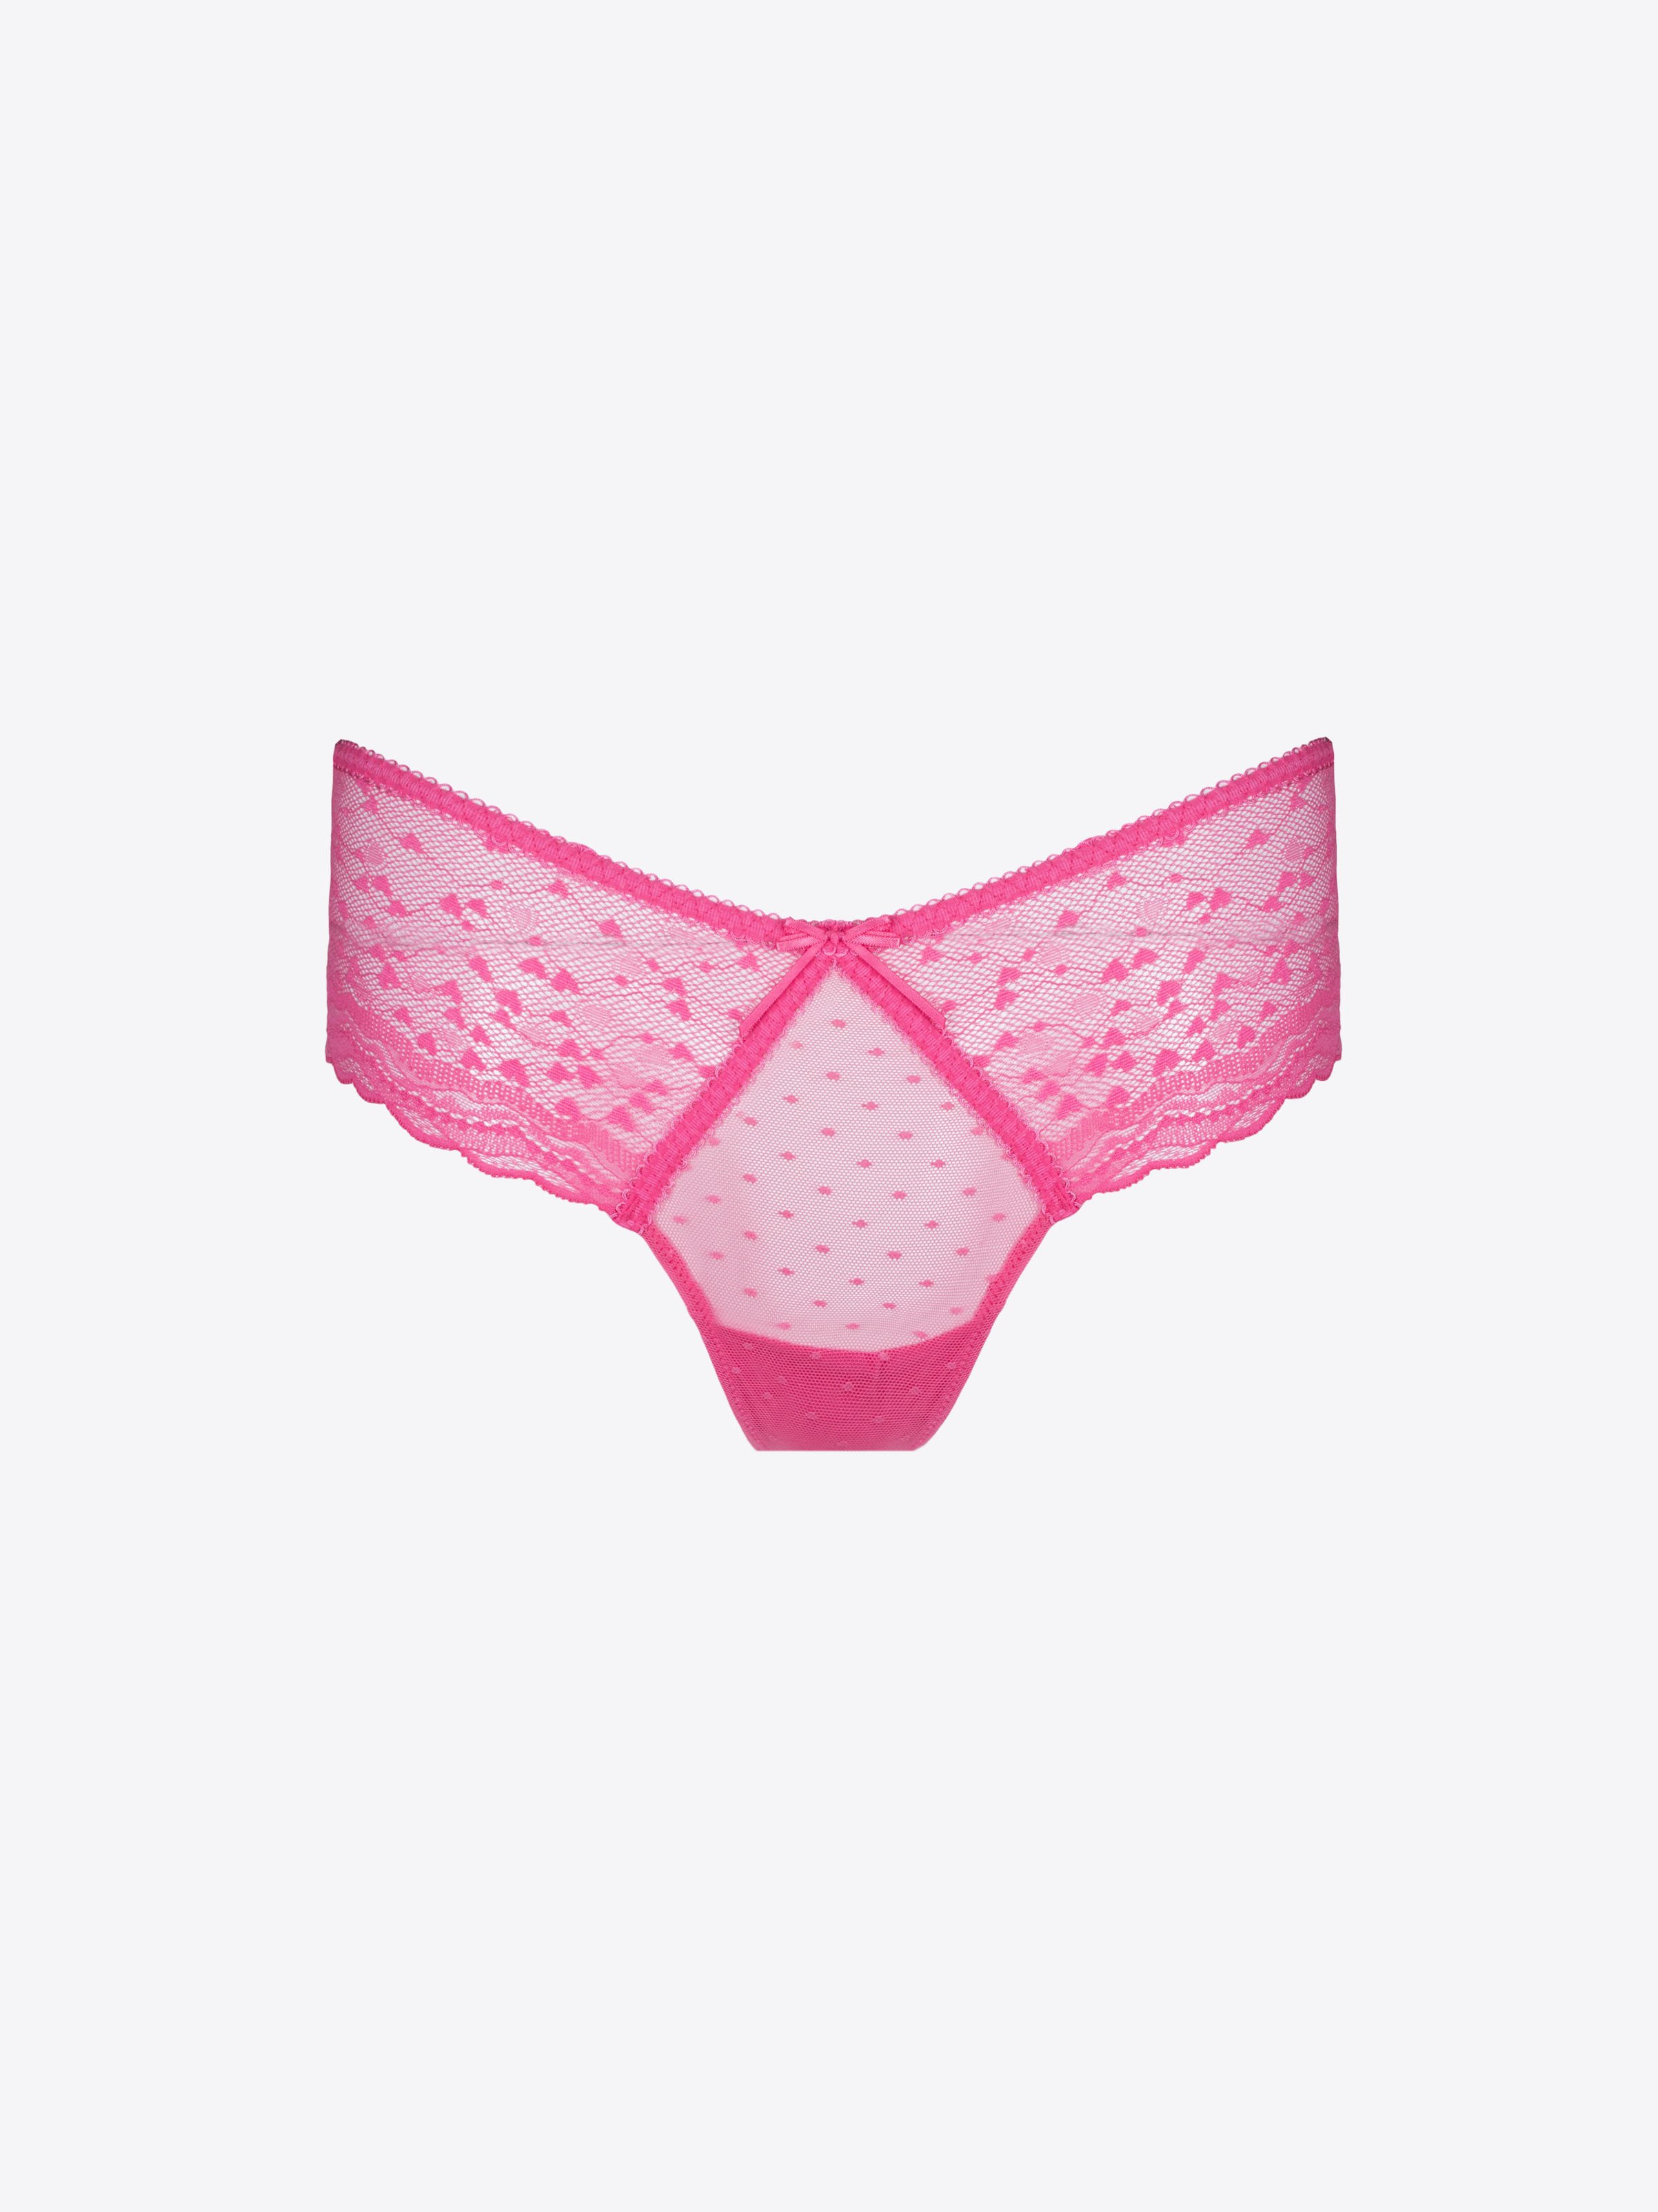 Lucca Hipster Thong - Hot Pink - CA$7.80 - CHANGE Lingerie